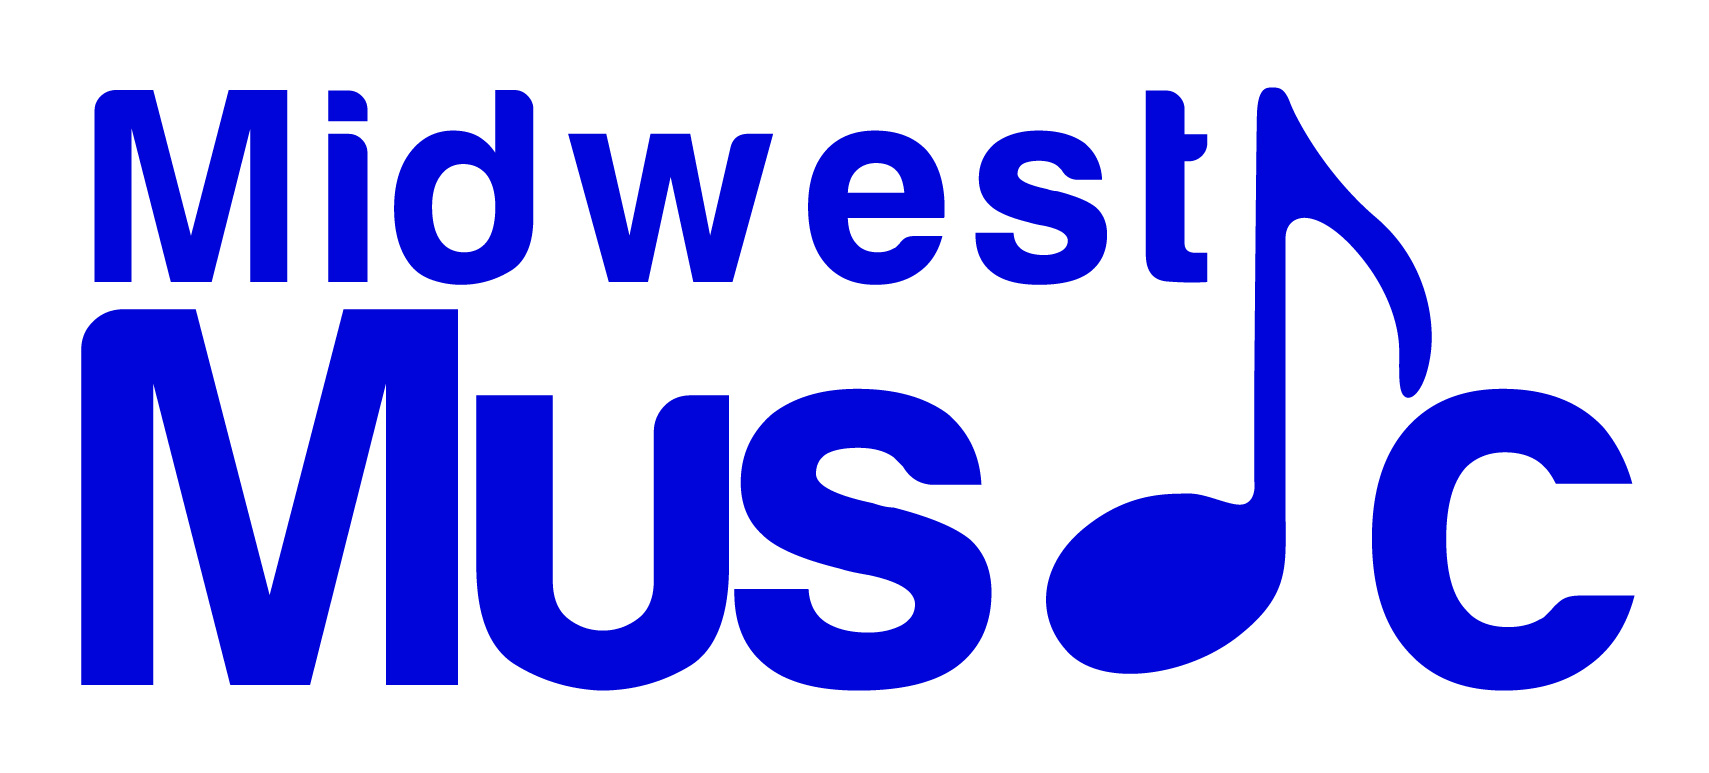 Midwest Music logo